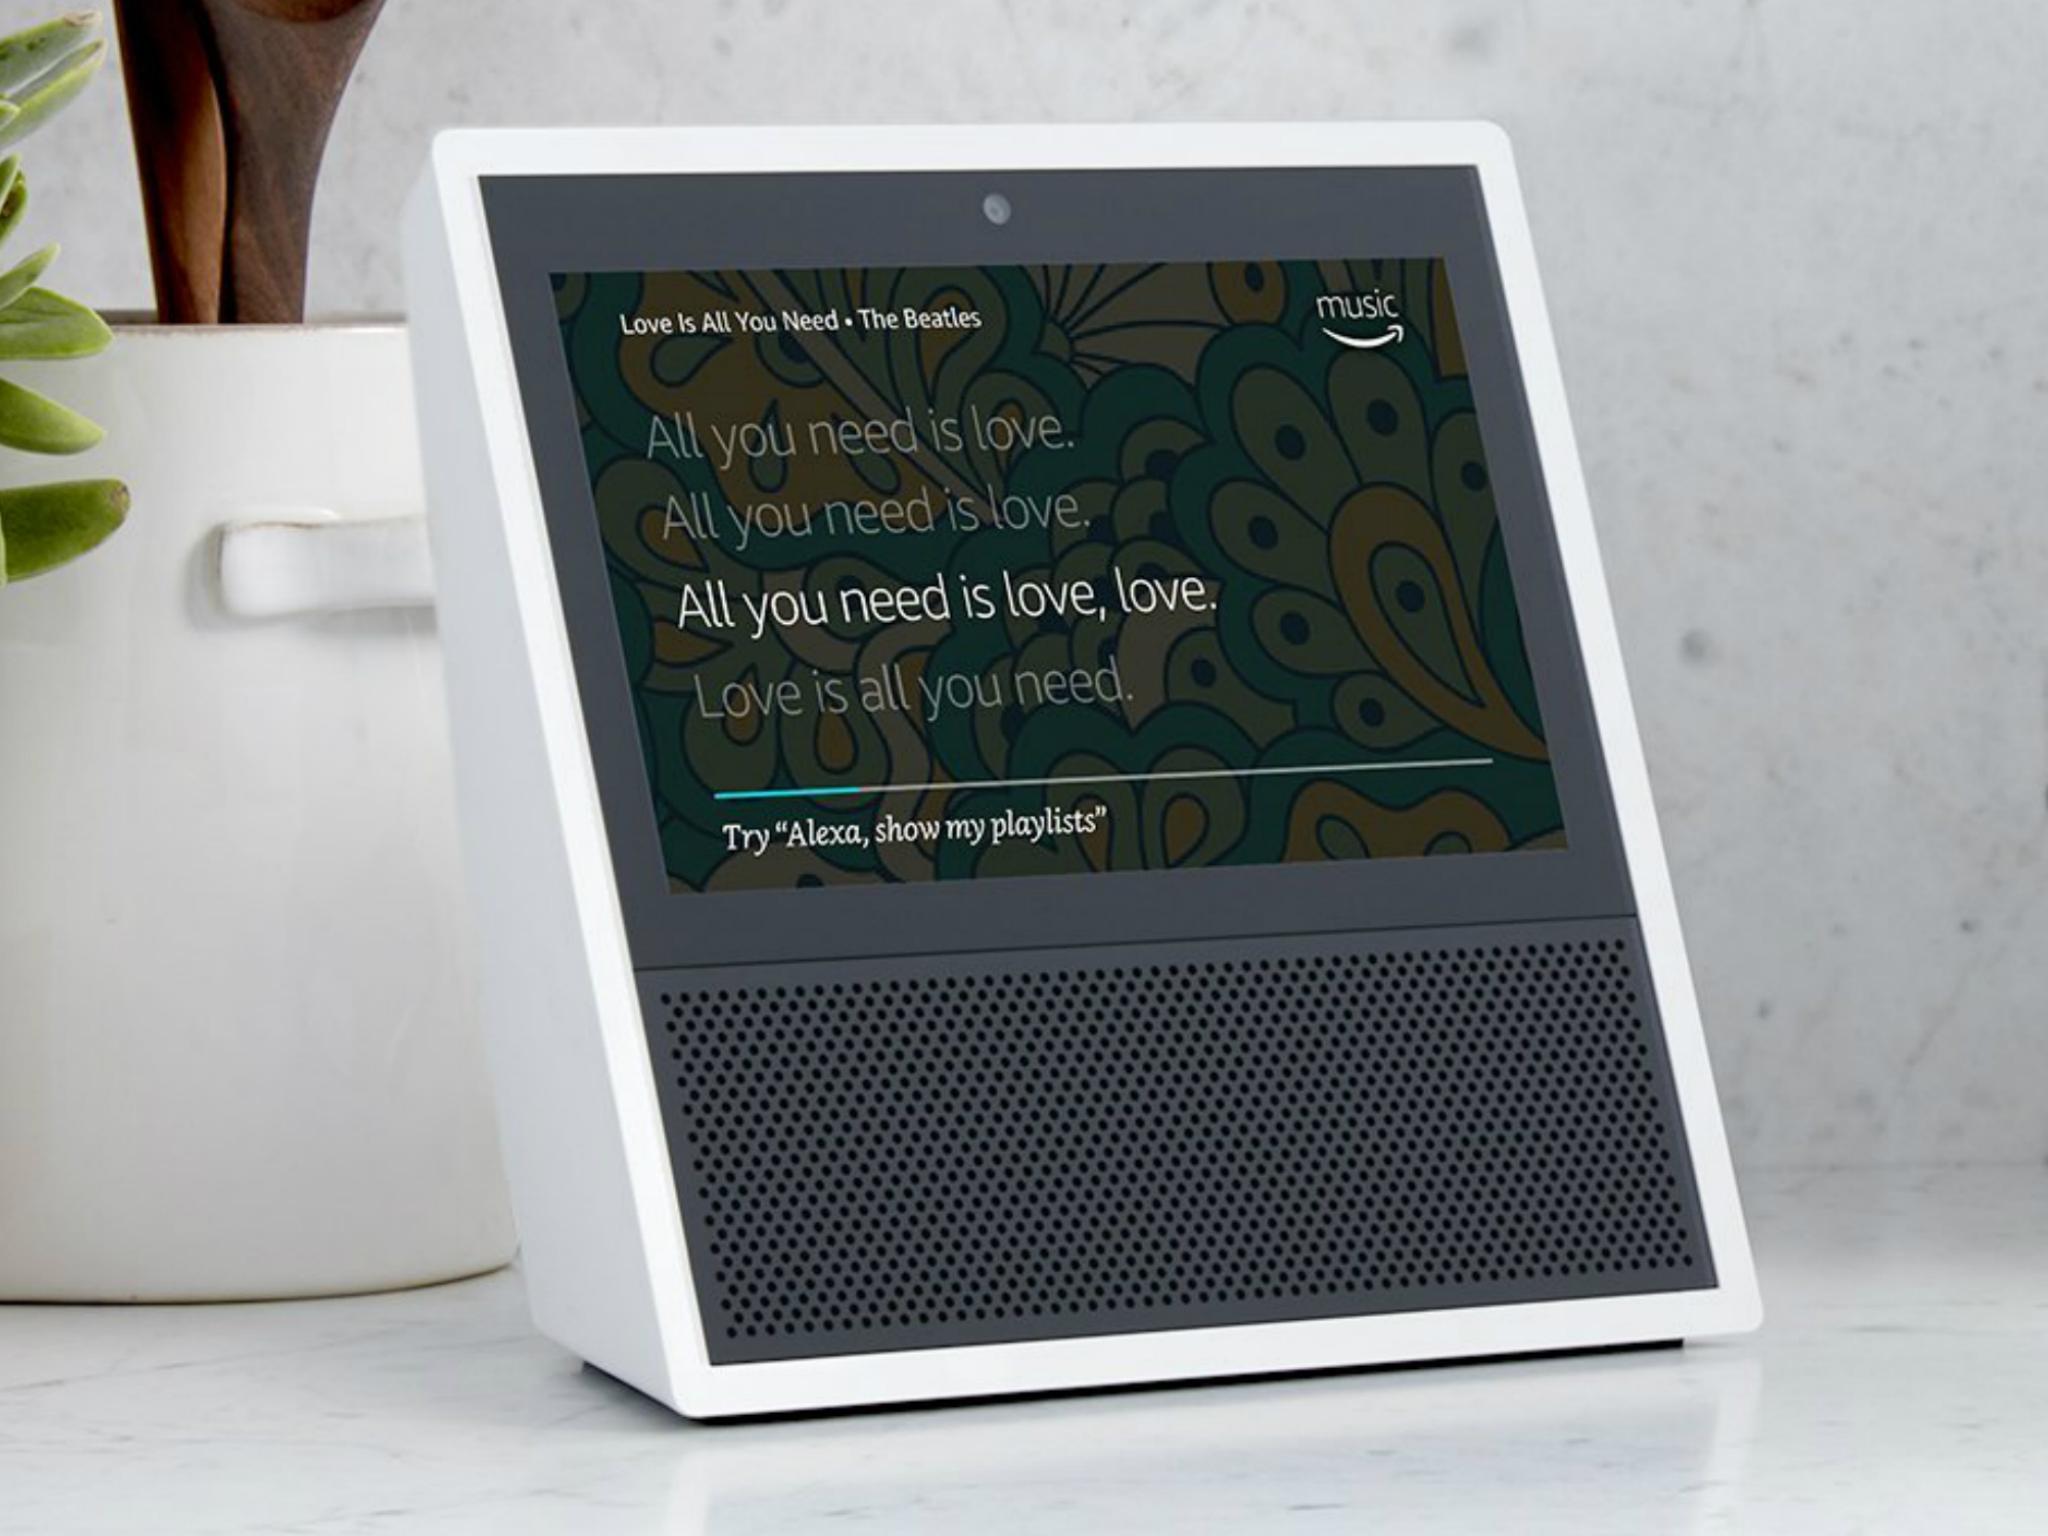 The Amazon Echo Show still doesn't have a UK release date